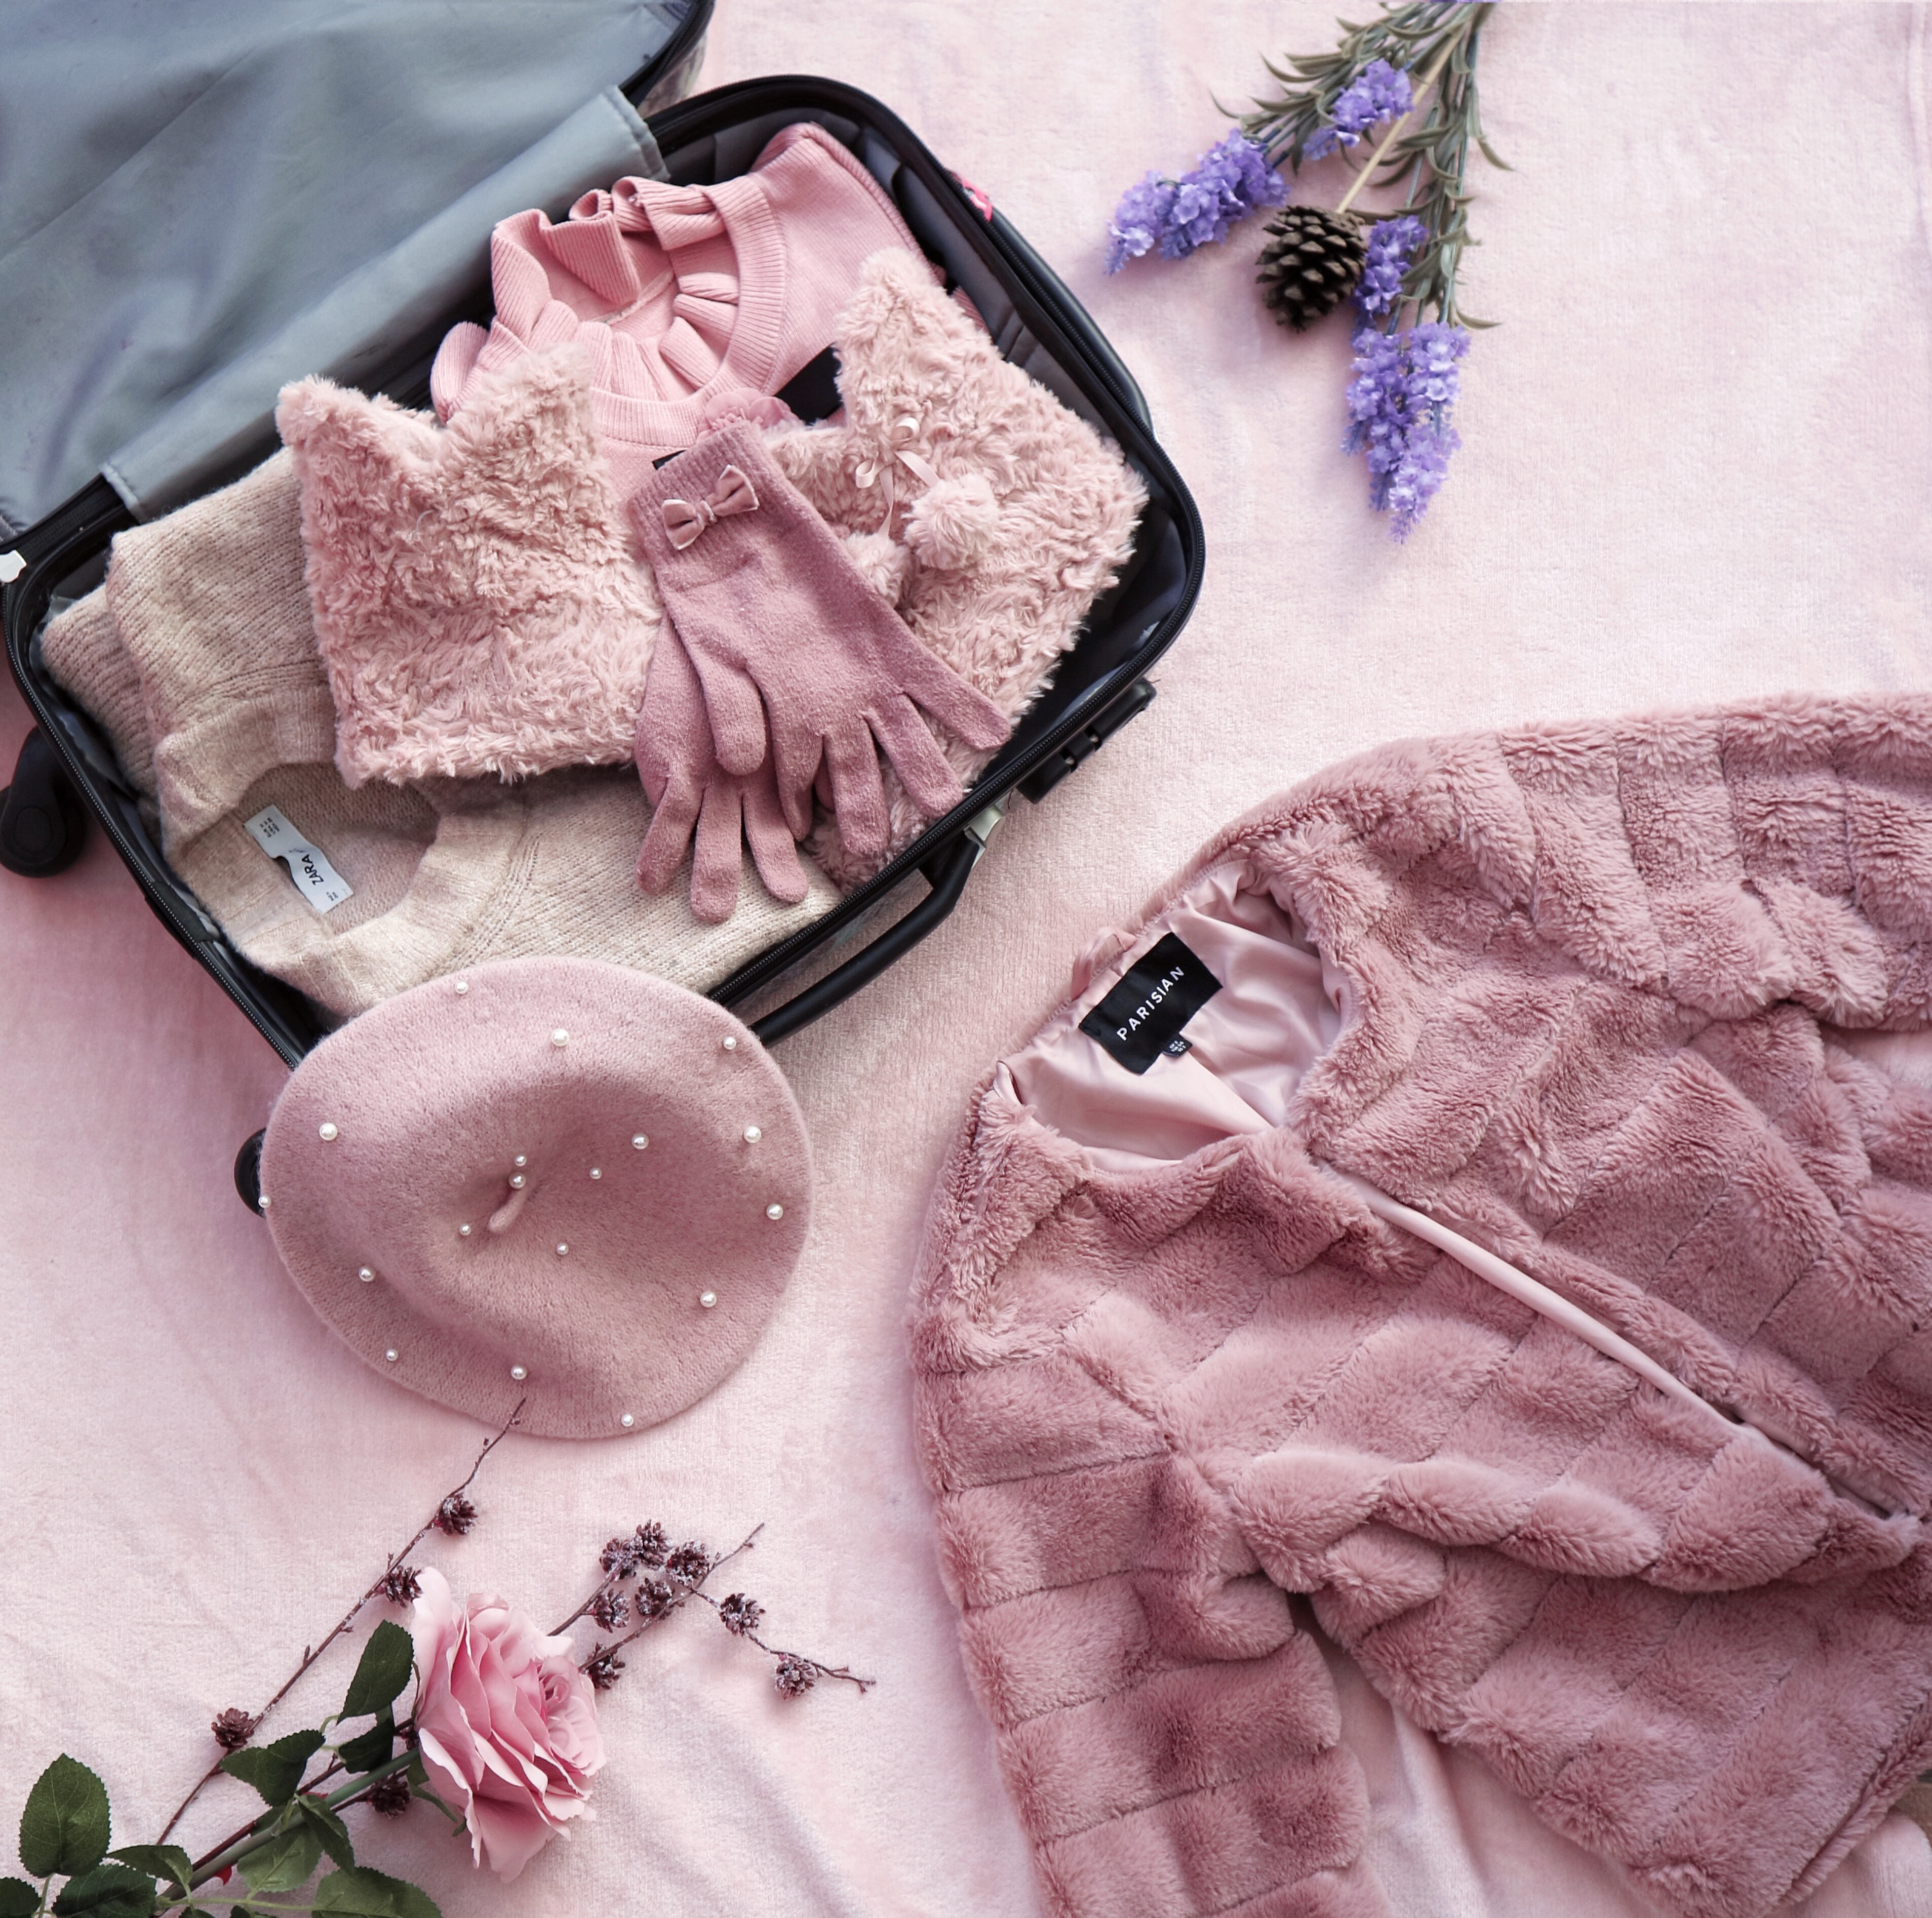 What to pack for a winter getaway:

A suitcase full of pink clothes is lying on a pink floor surrounded by springtime flowers and a pink faux fur coat.